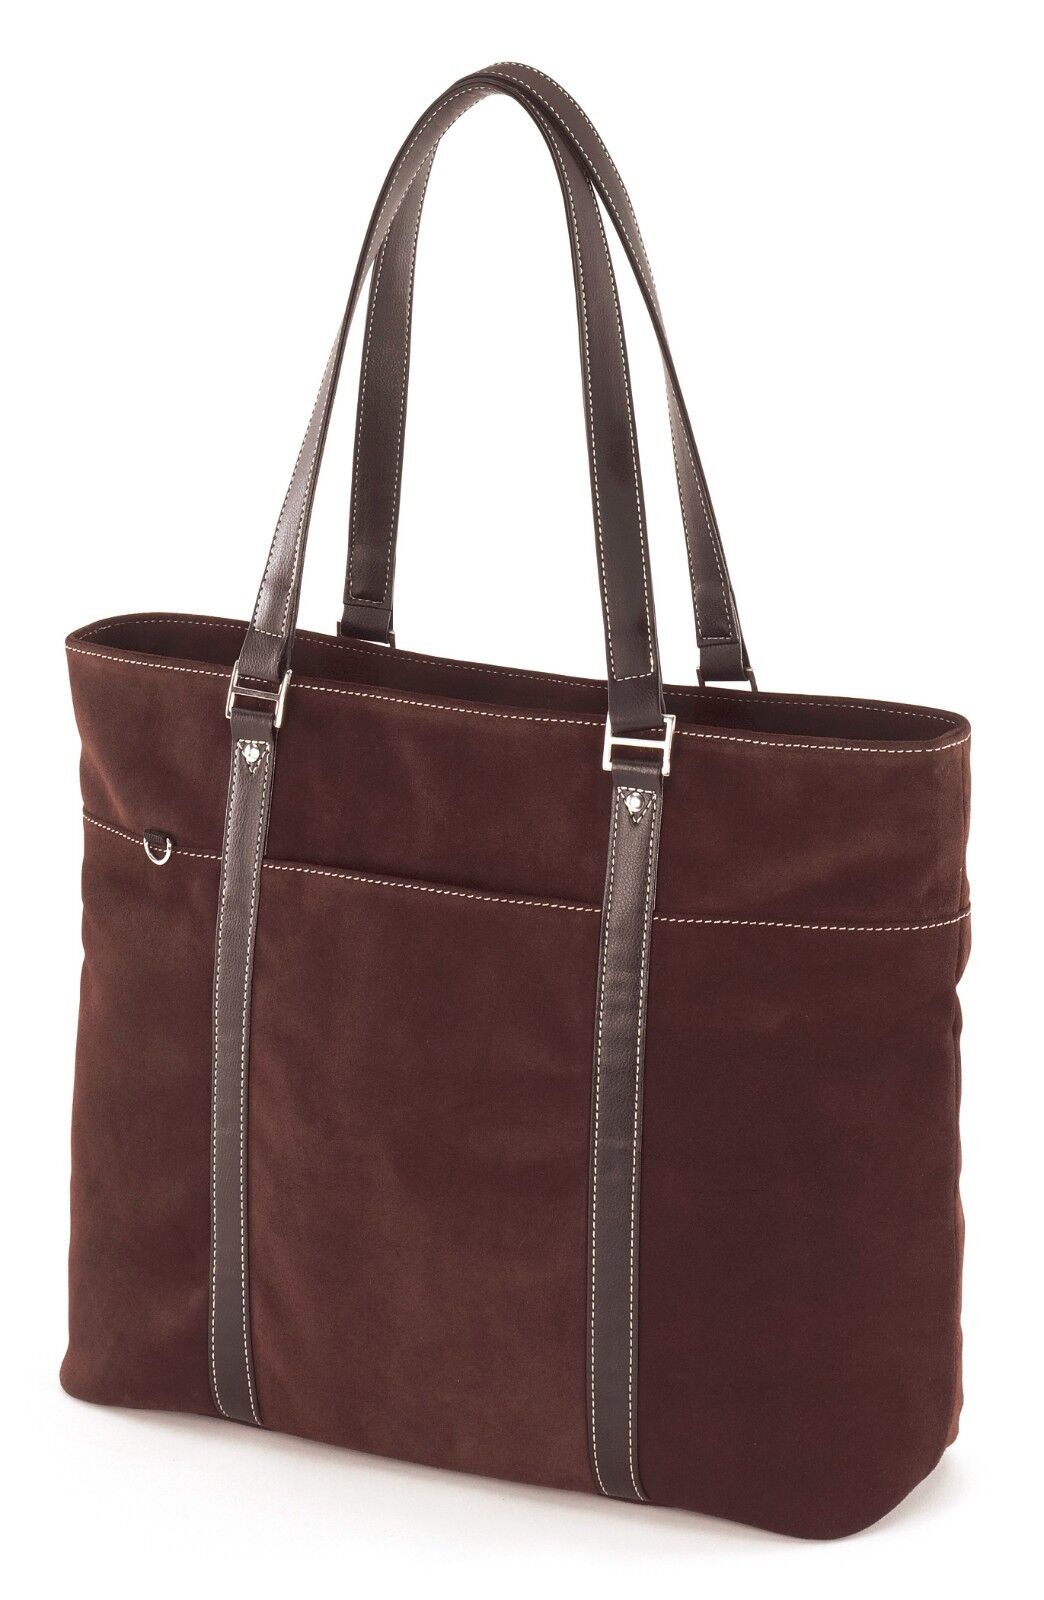 Mobile Edge 17.3" Ultra Laptop Tote (Chocolate Suede)